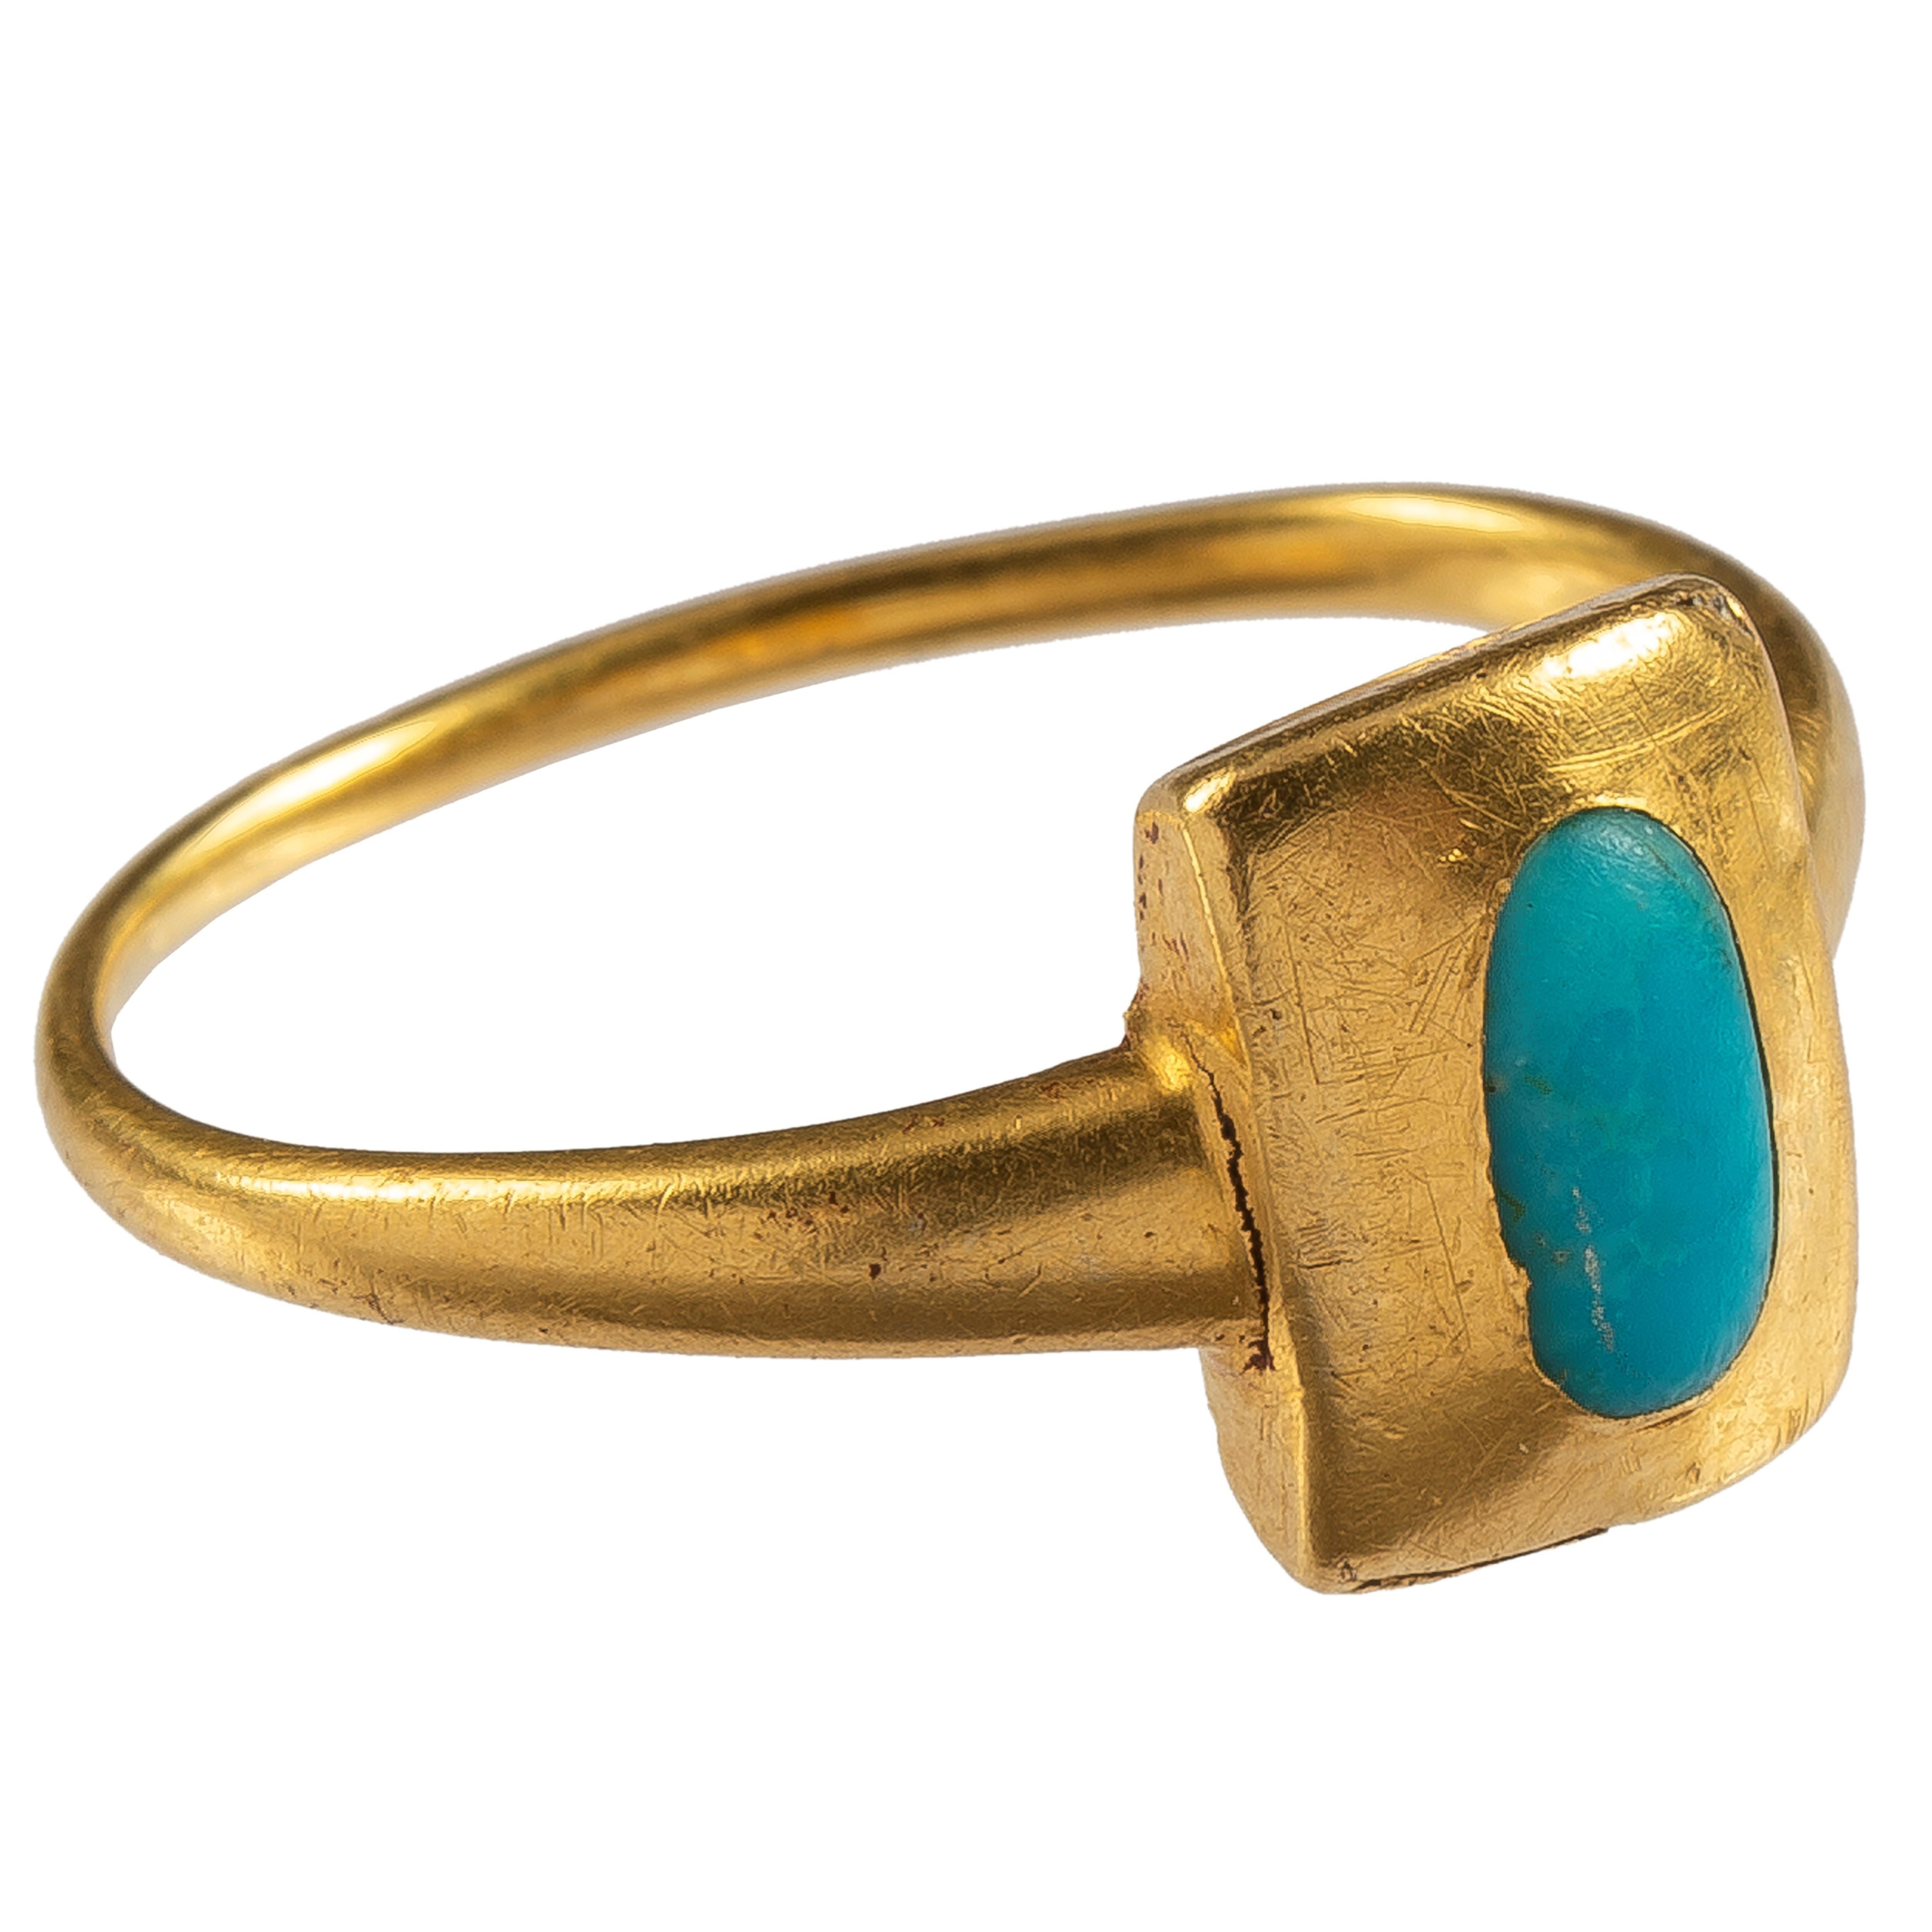 Antique Gold Renaissance Ring with Turquoise Cabochon 1